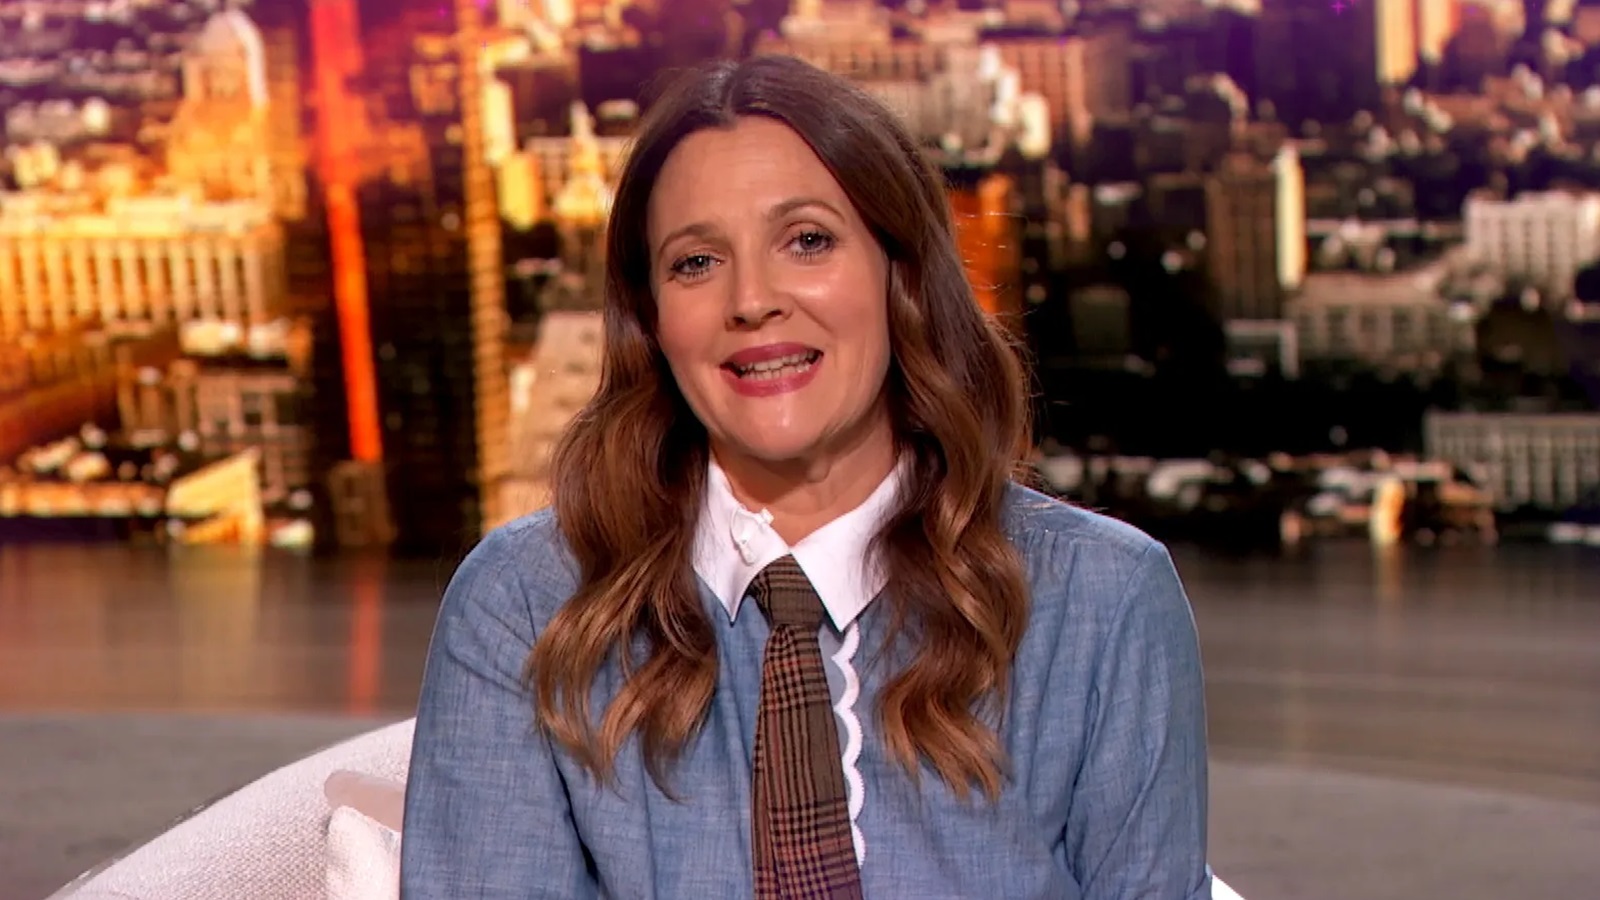 Drew Barrymore: Stalker interrupted the event, forcing the star to leave the stage